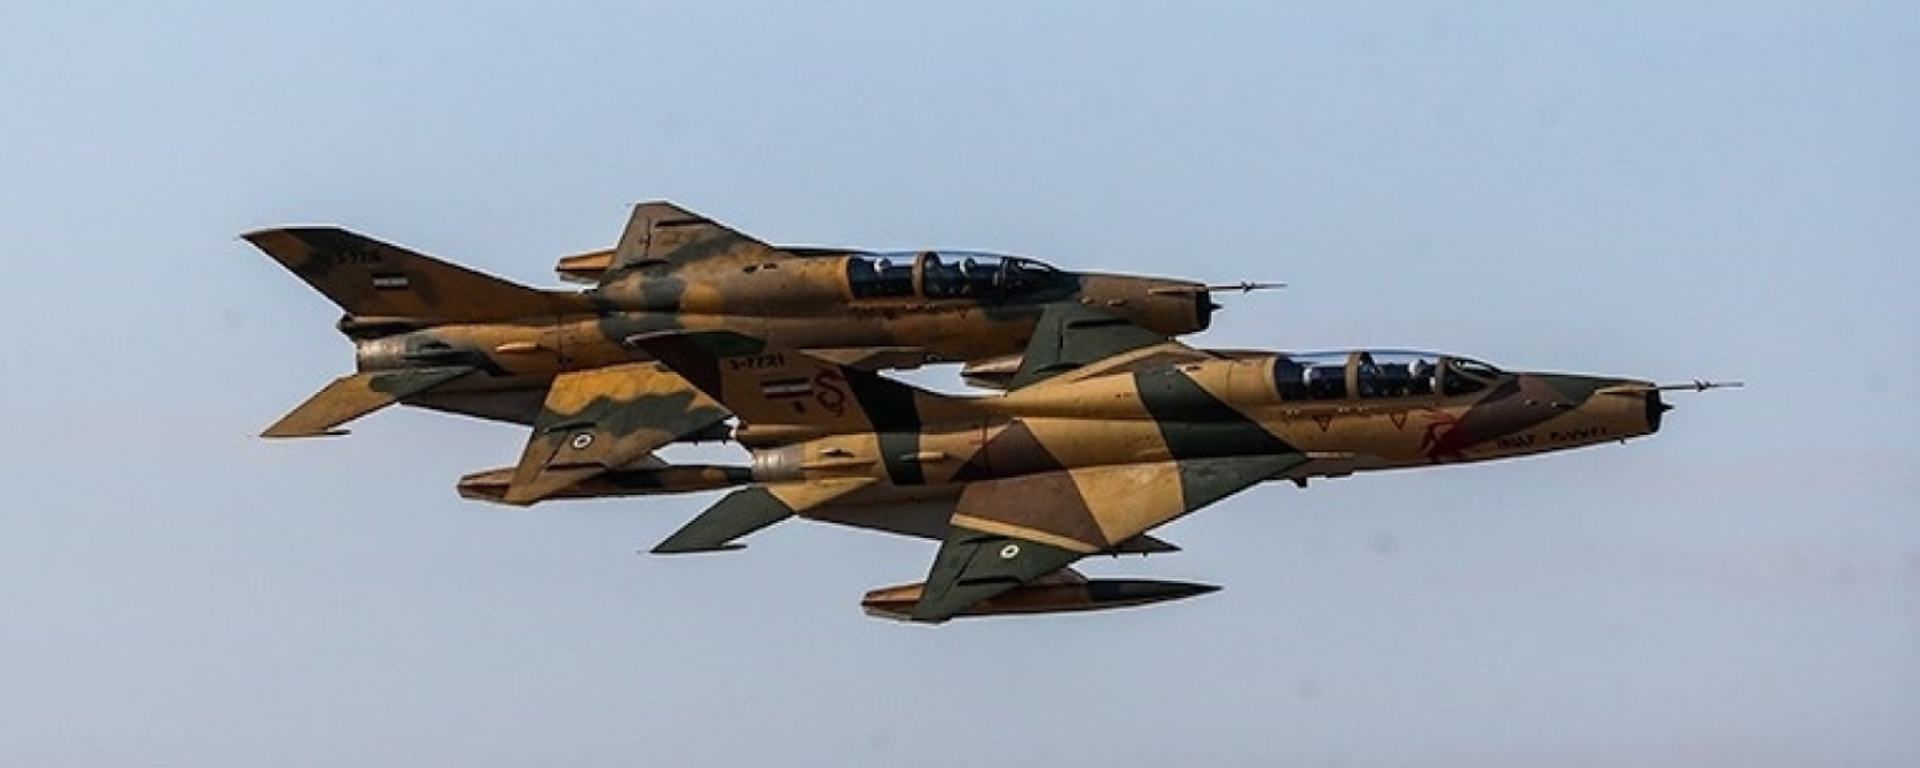 Two Islamic Republic of Iran Air Force (IRIAF) F-7 fighters during a 2019 exercise - Sputnik International, 1920, 20.10.2021